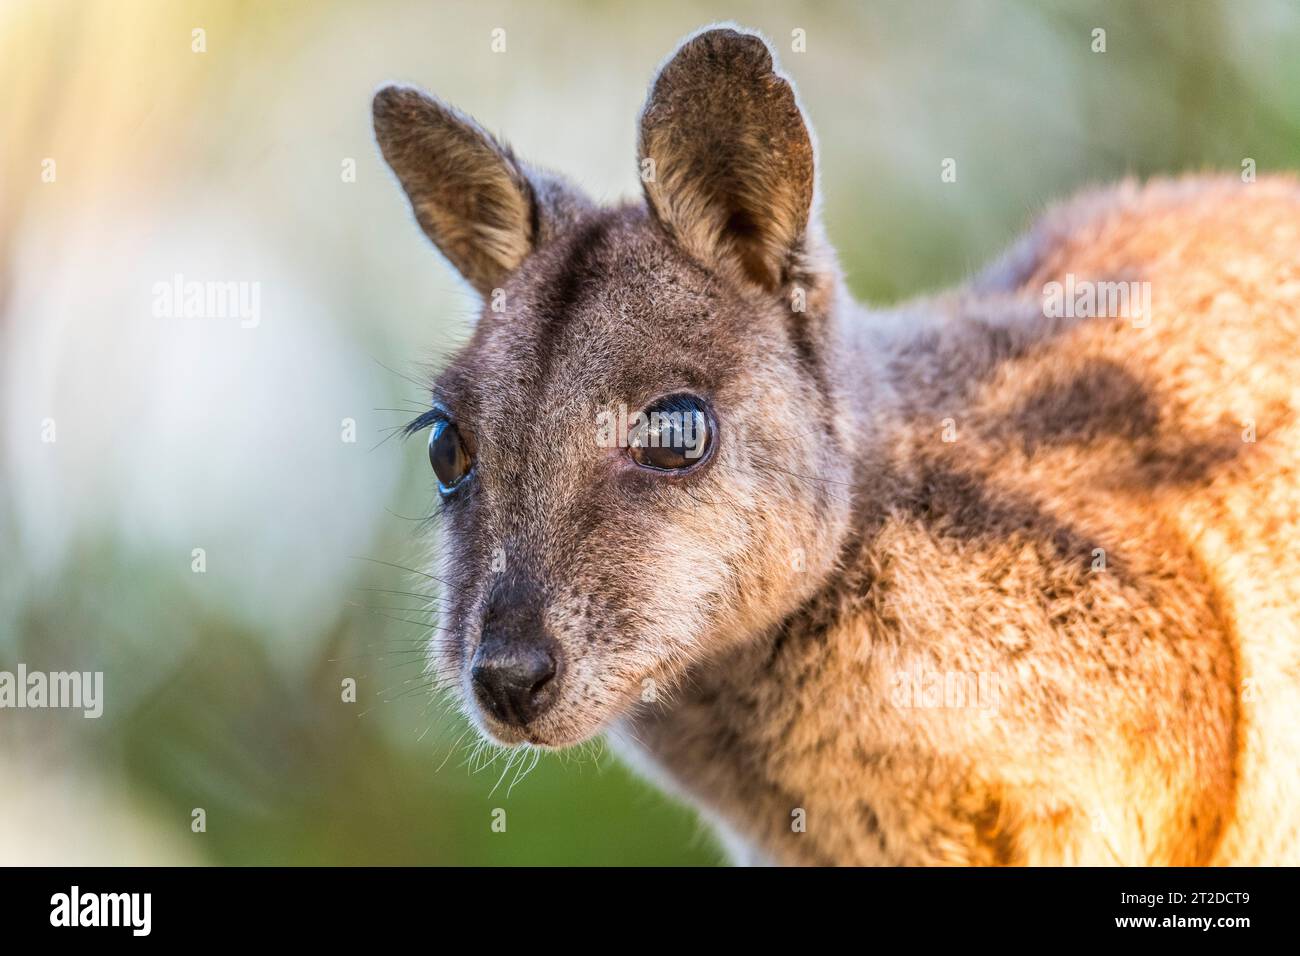 The allied rock-wallaby or Weasel rock-wallaby (Petrogale assimilis) is a species of rock-wallaby found in northeastern Queensland, Australia Stock Photo